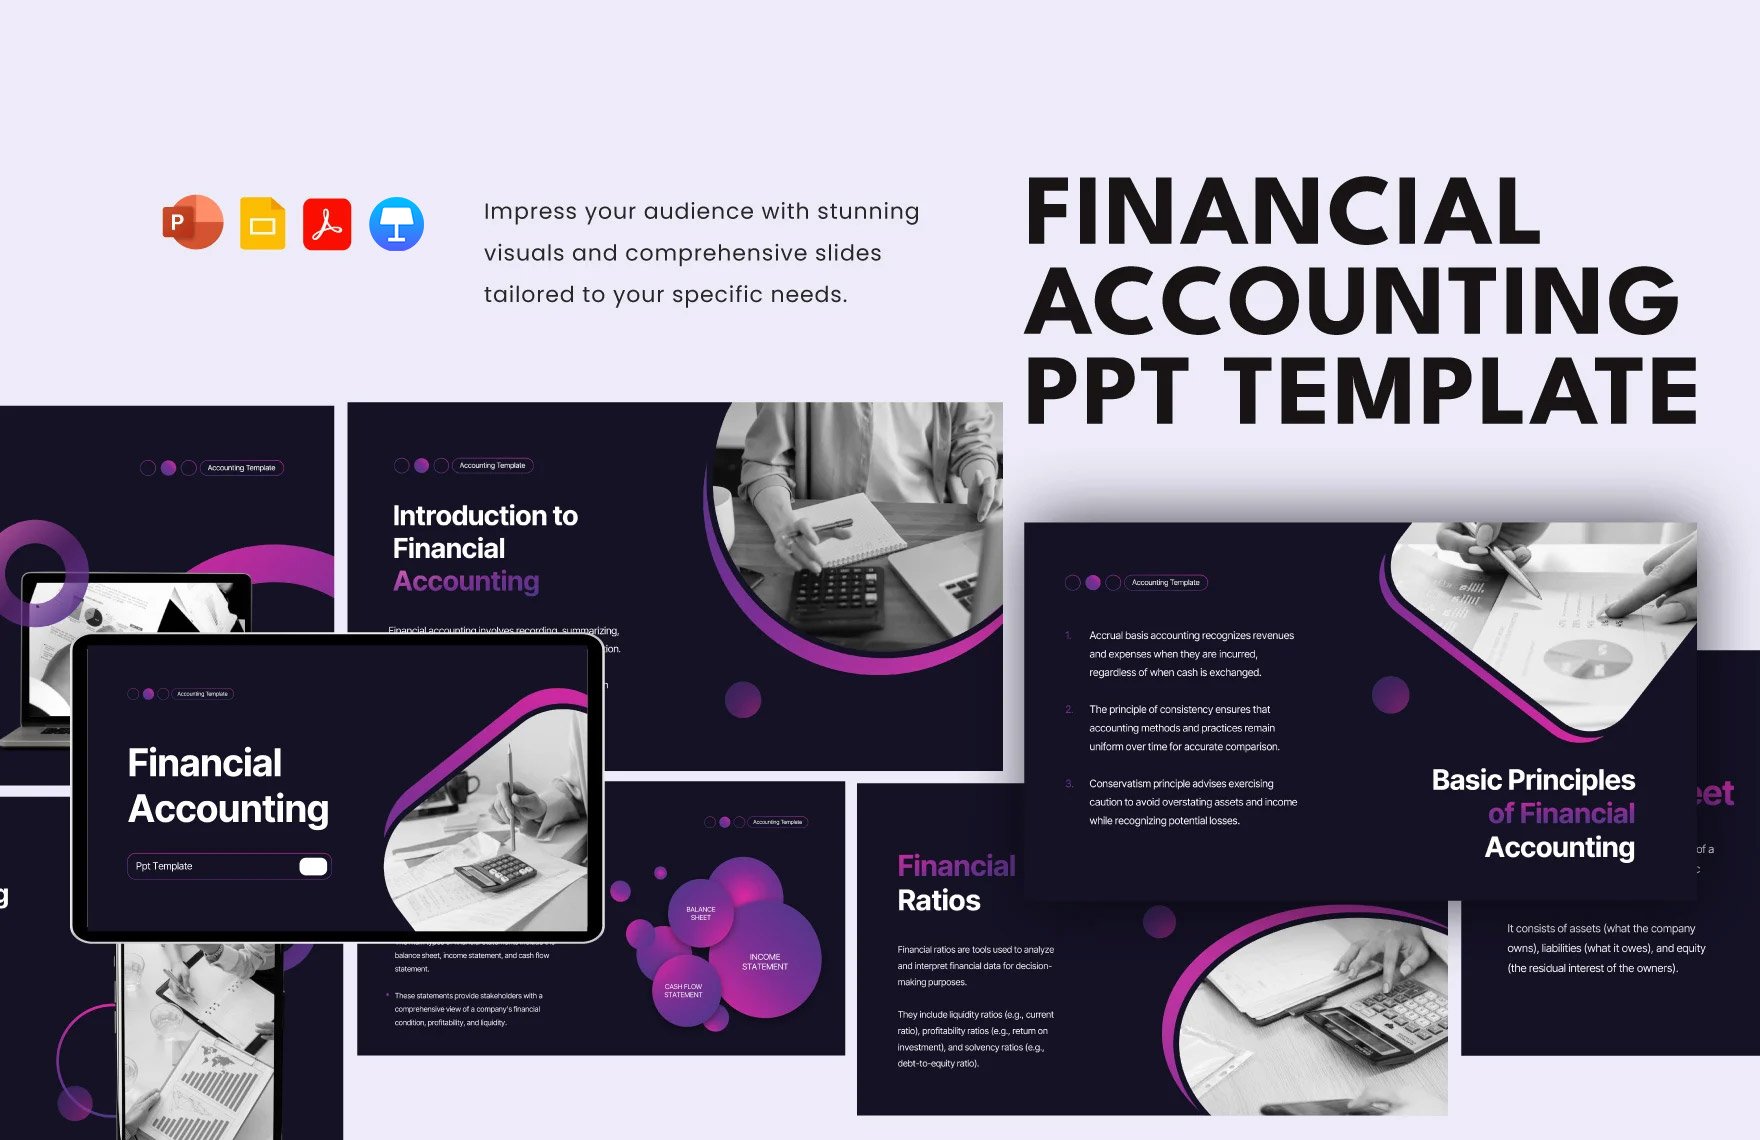 Financial Accounting PPT Template in PDF, PowerPoint, Google Slides, Apple Keynote